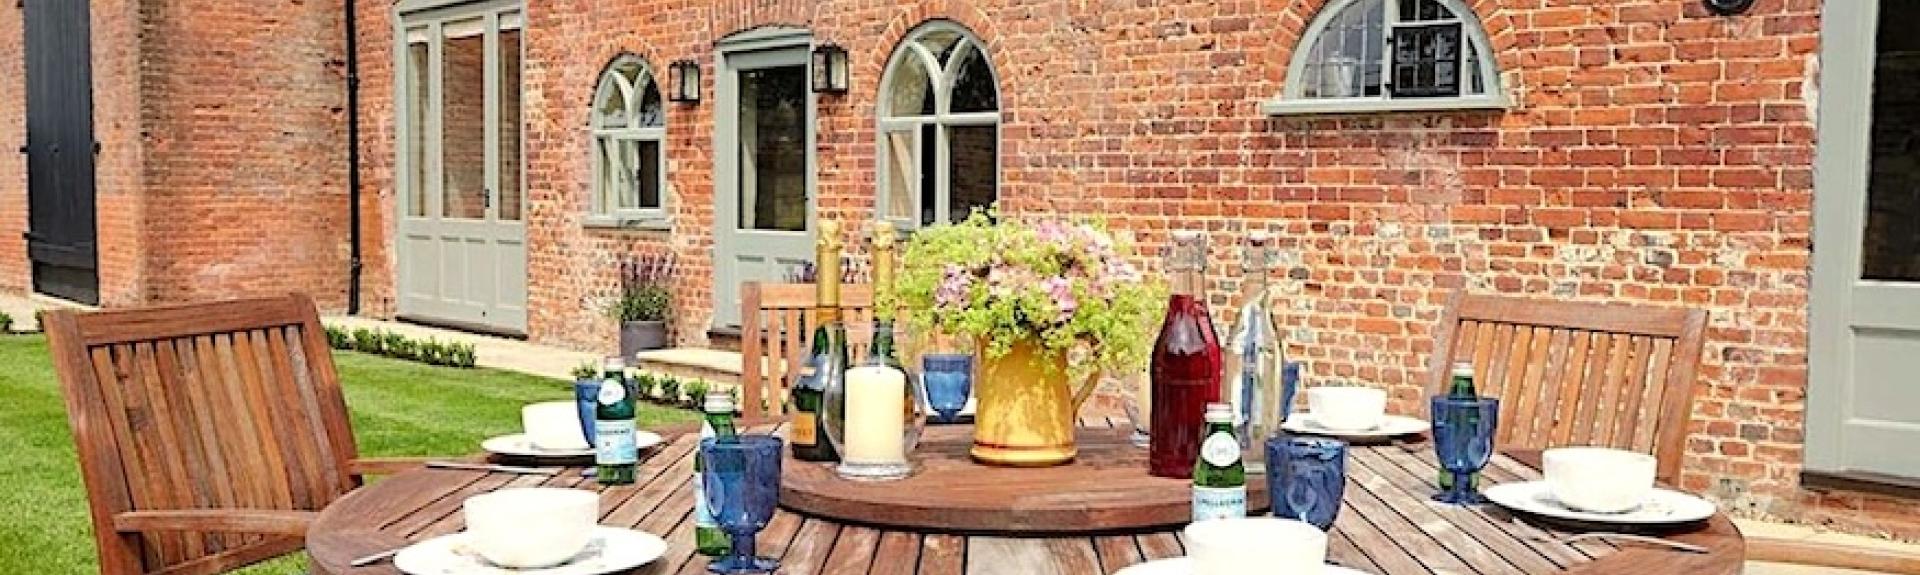 A wood dining table set for breakfast stands on a courtyard in front of a brick-built Norfolk cottage with arched windows.